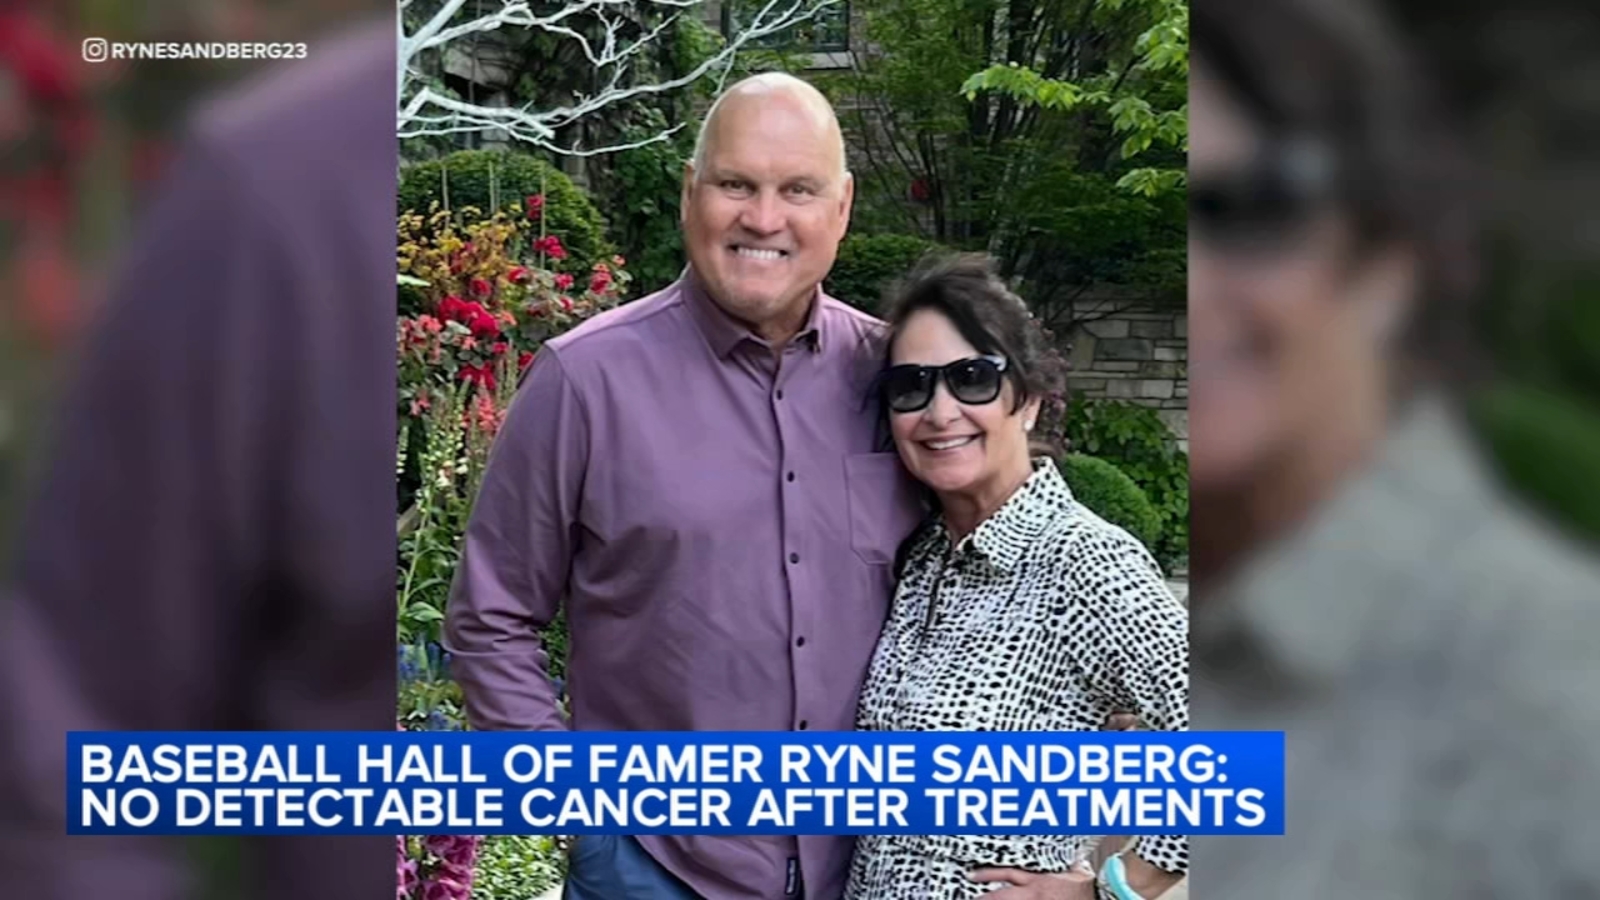 Ryne Sandberg cancer free: Chicago Cubs Hall of Famer says he has no detection of metastatic prostate cancer after treatment [Video]